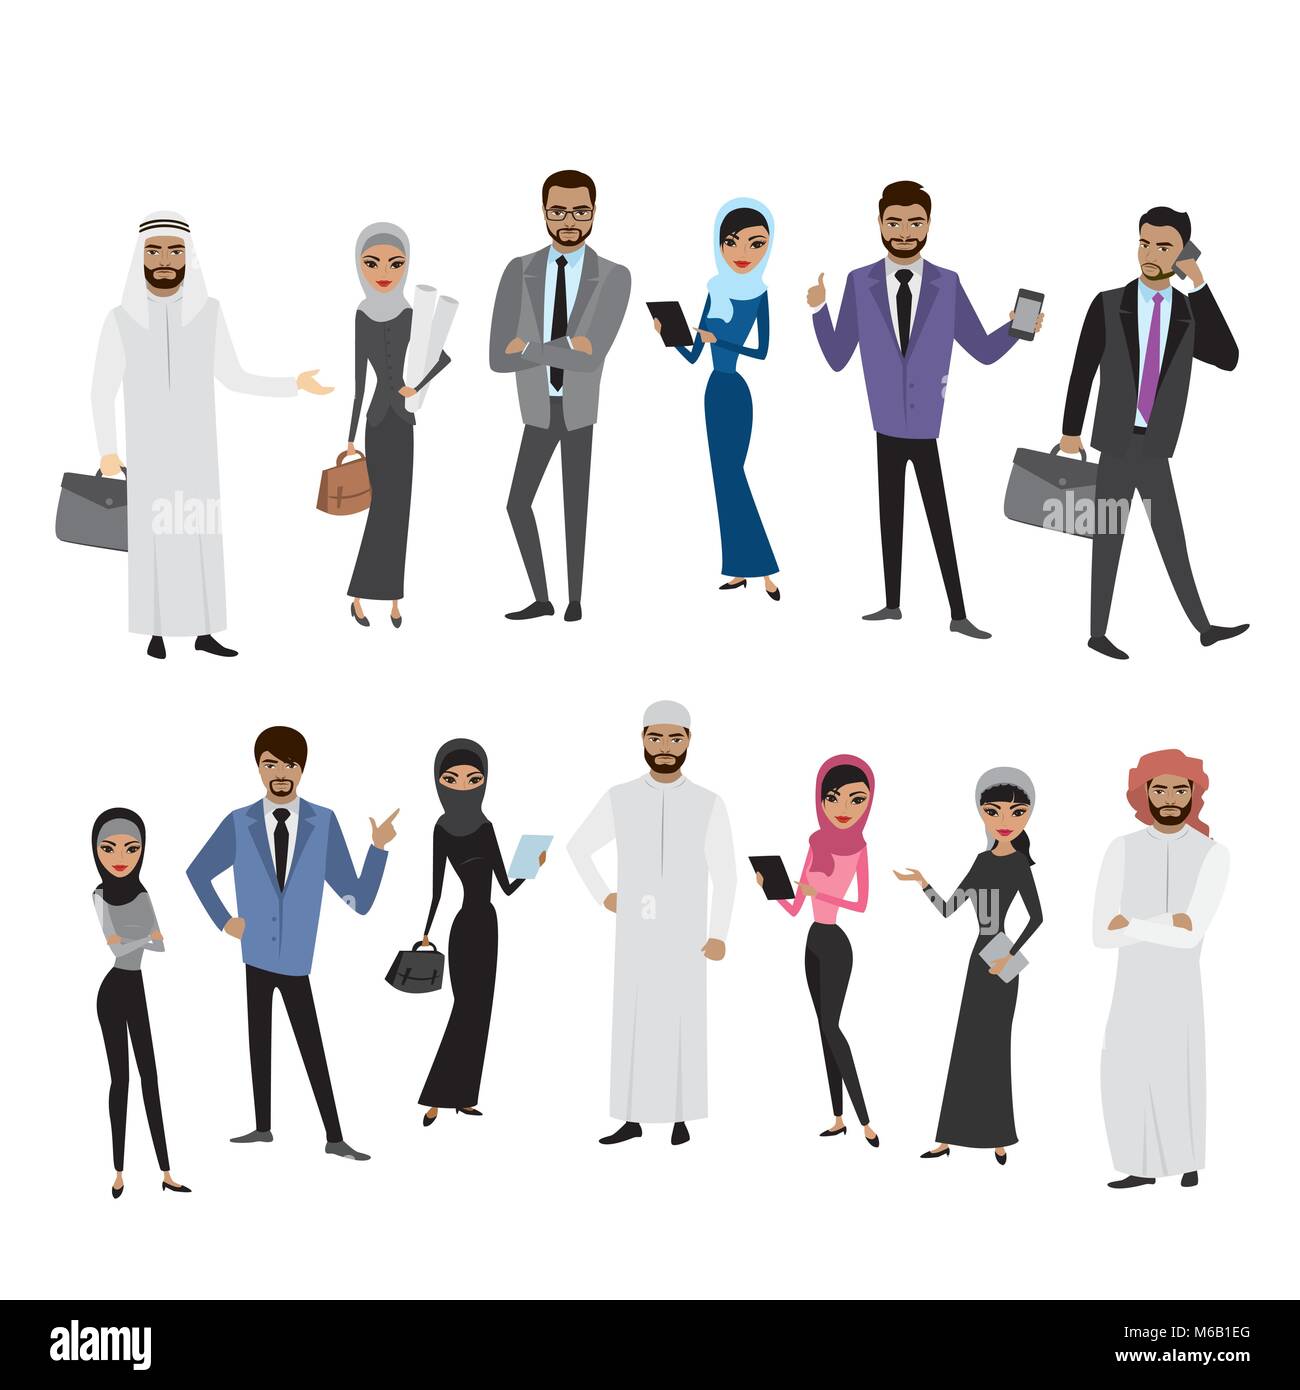 Big cartoon set of Arab men and women in different clothes and characters, isolated on white, vector illustration Stock Vector